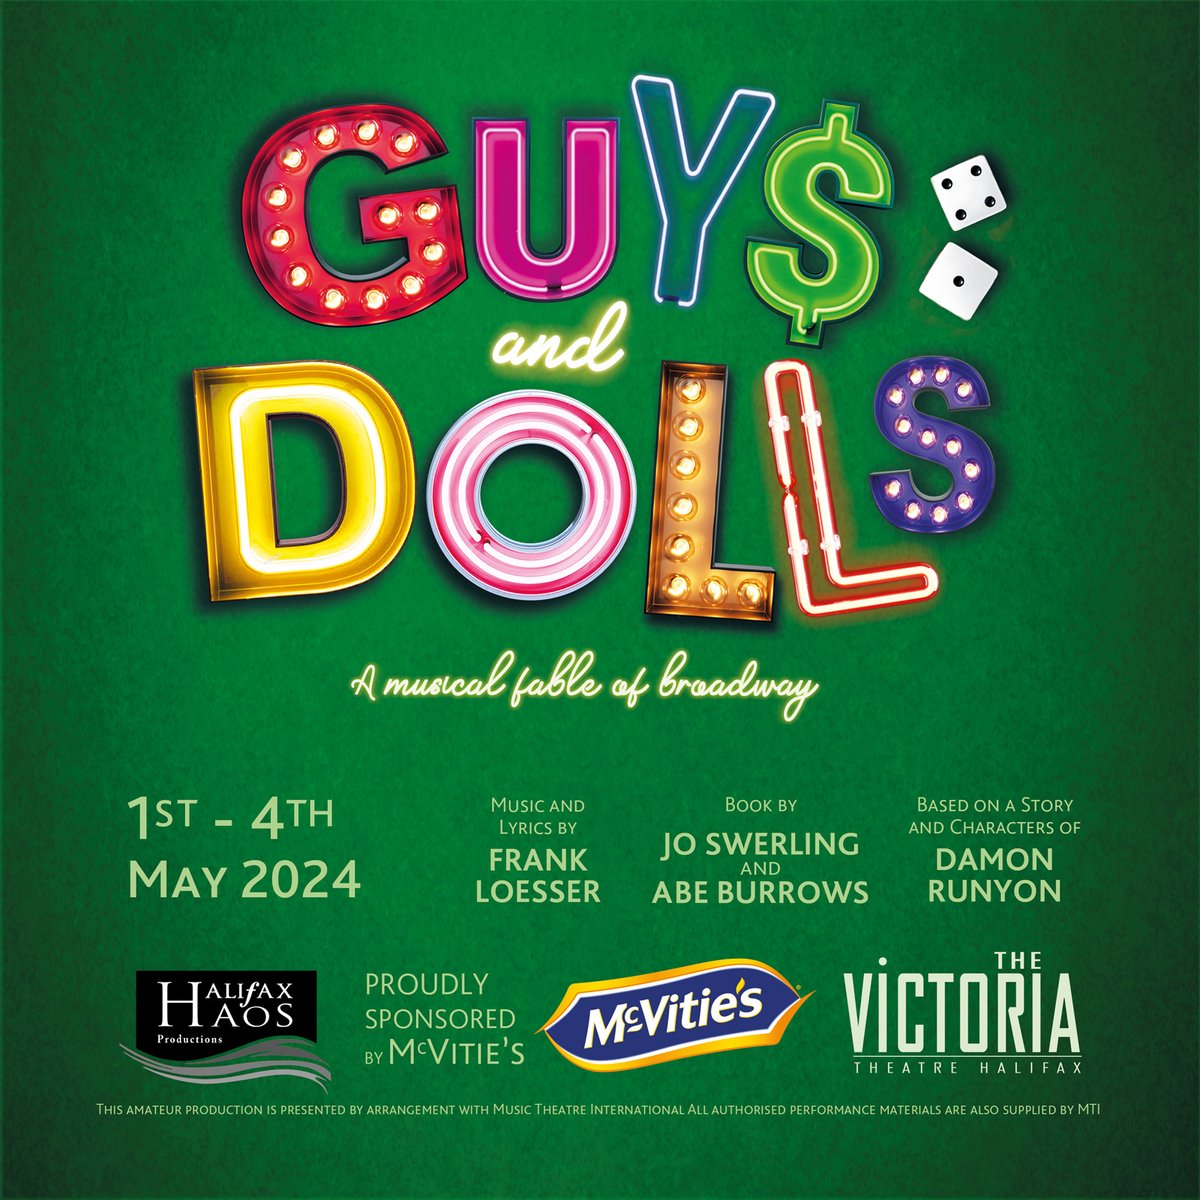 TONIGHT AT THE VICTORIA THEATRE! Guys and Dolls presented by HAOS Productions Show starts at 7:15pm (doors open 6:30pm) Tickets still available - Book now at tinyurl.com/yc35t6w2 Show runs to Saturday 4 May